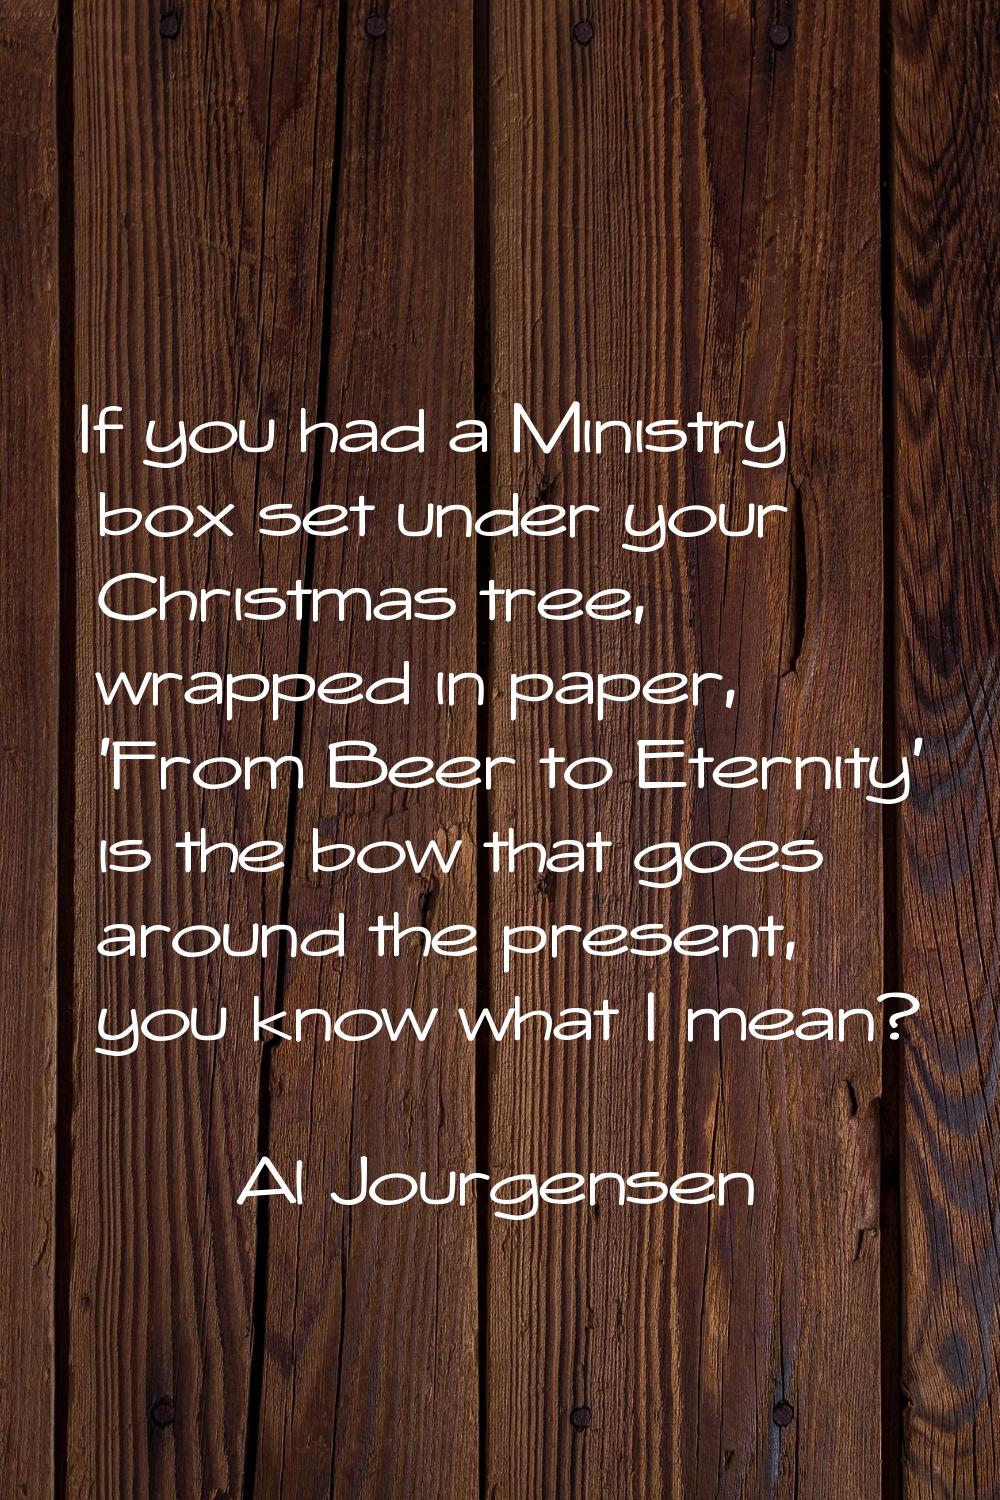 If you had a Ministry box set under your Christmas tree, wrapped in paper, 'From Beer to Eternity' 